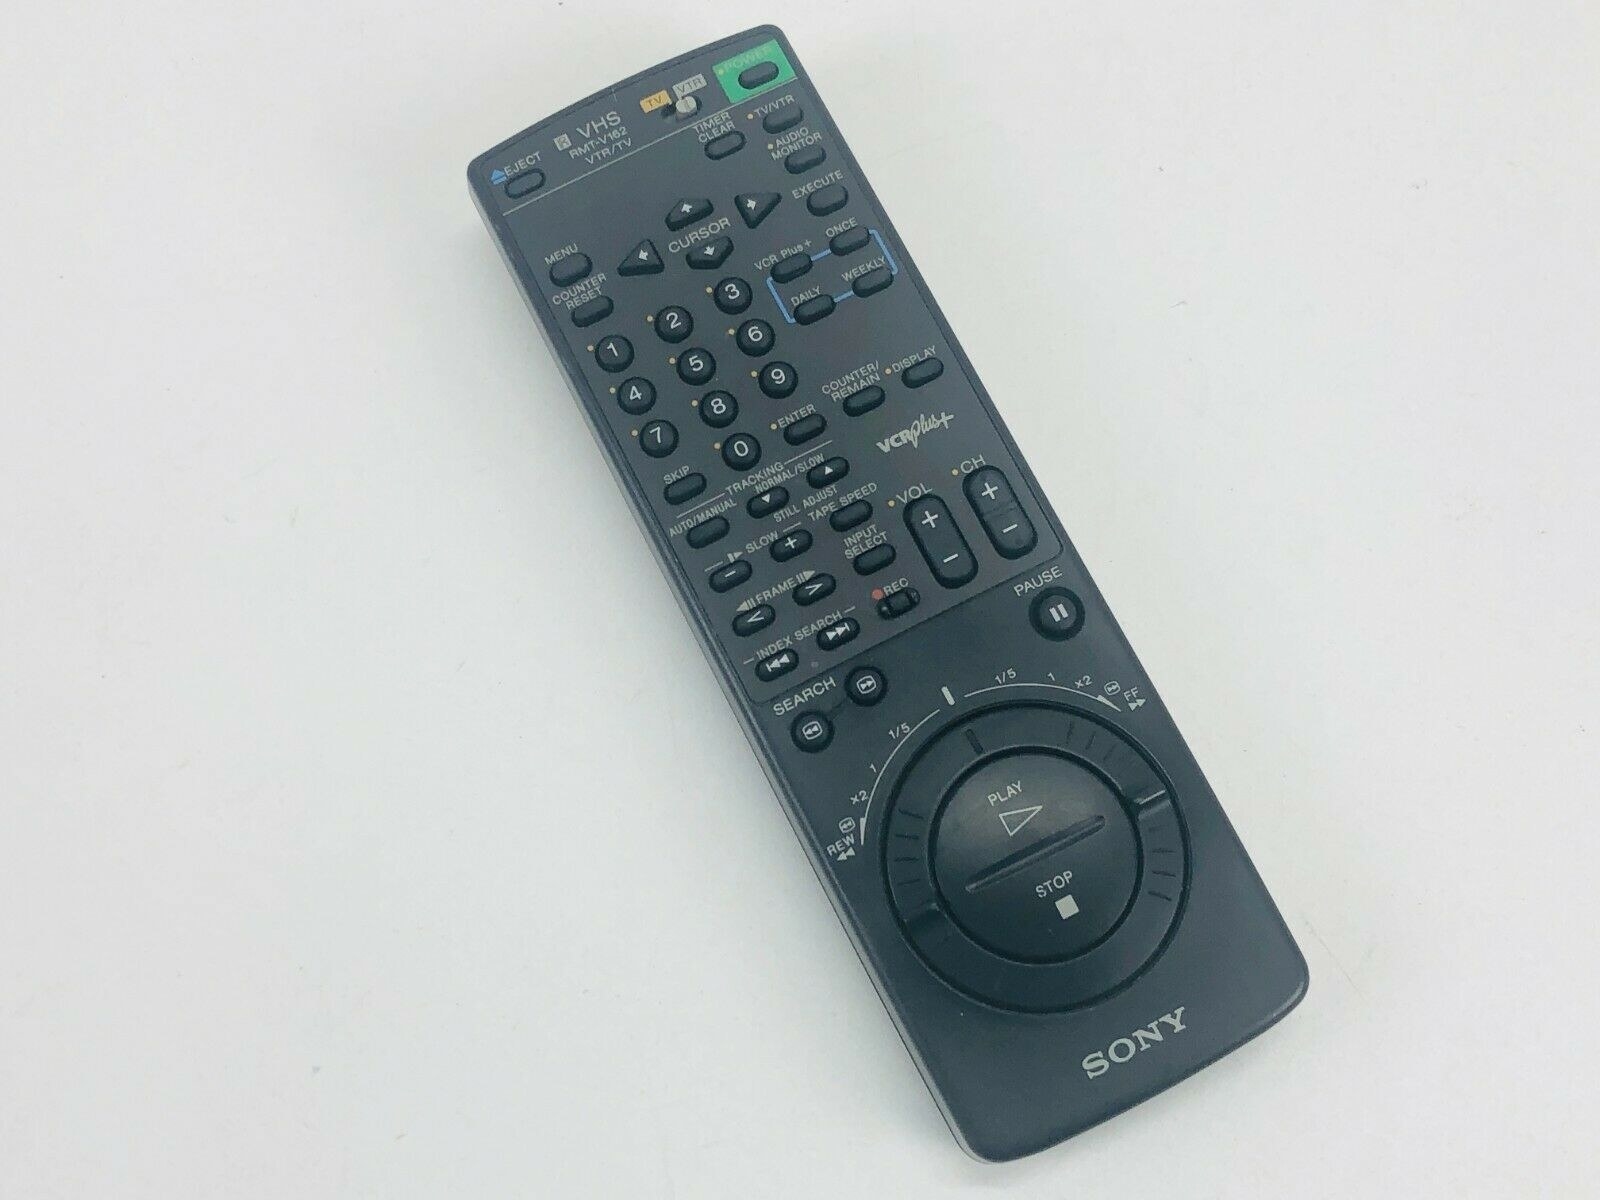 The remote to a Sony VCR.